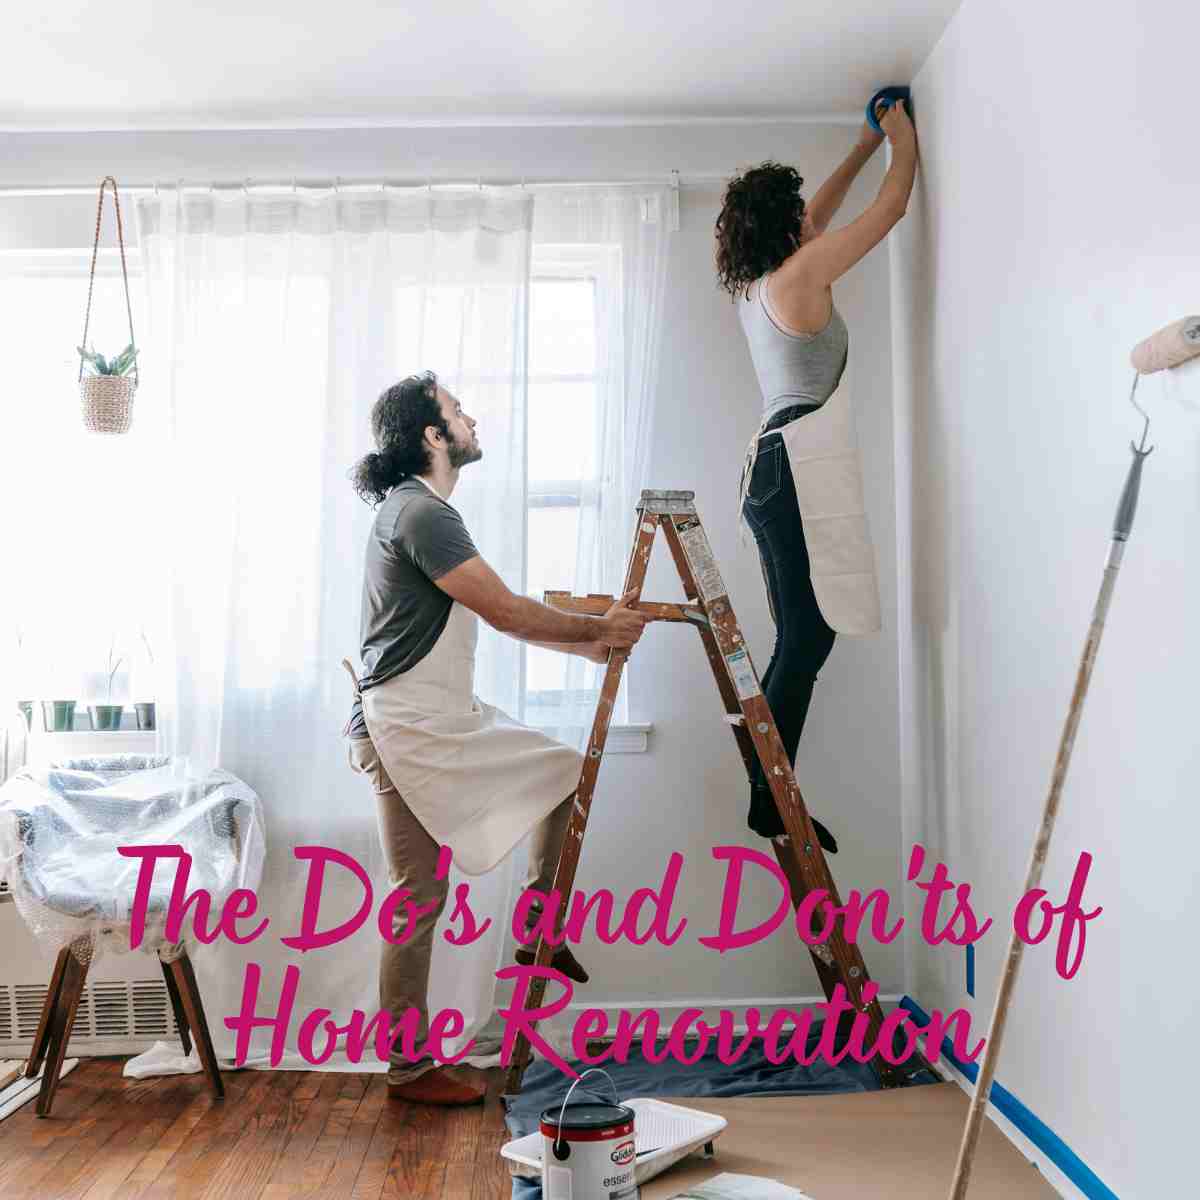 The Do's and Don'ts of Home Renovation